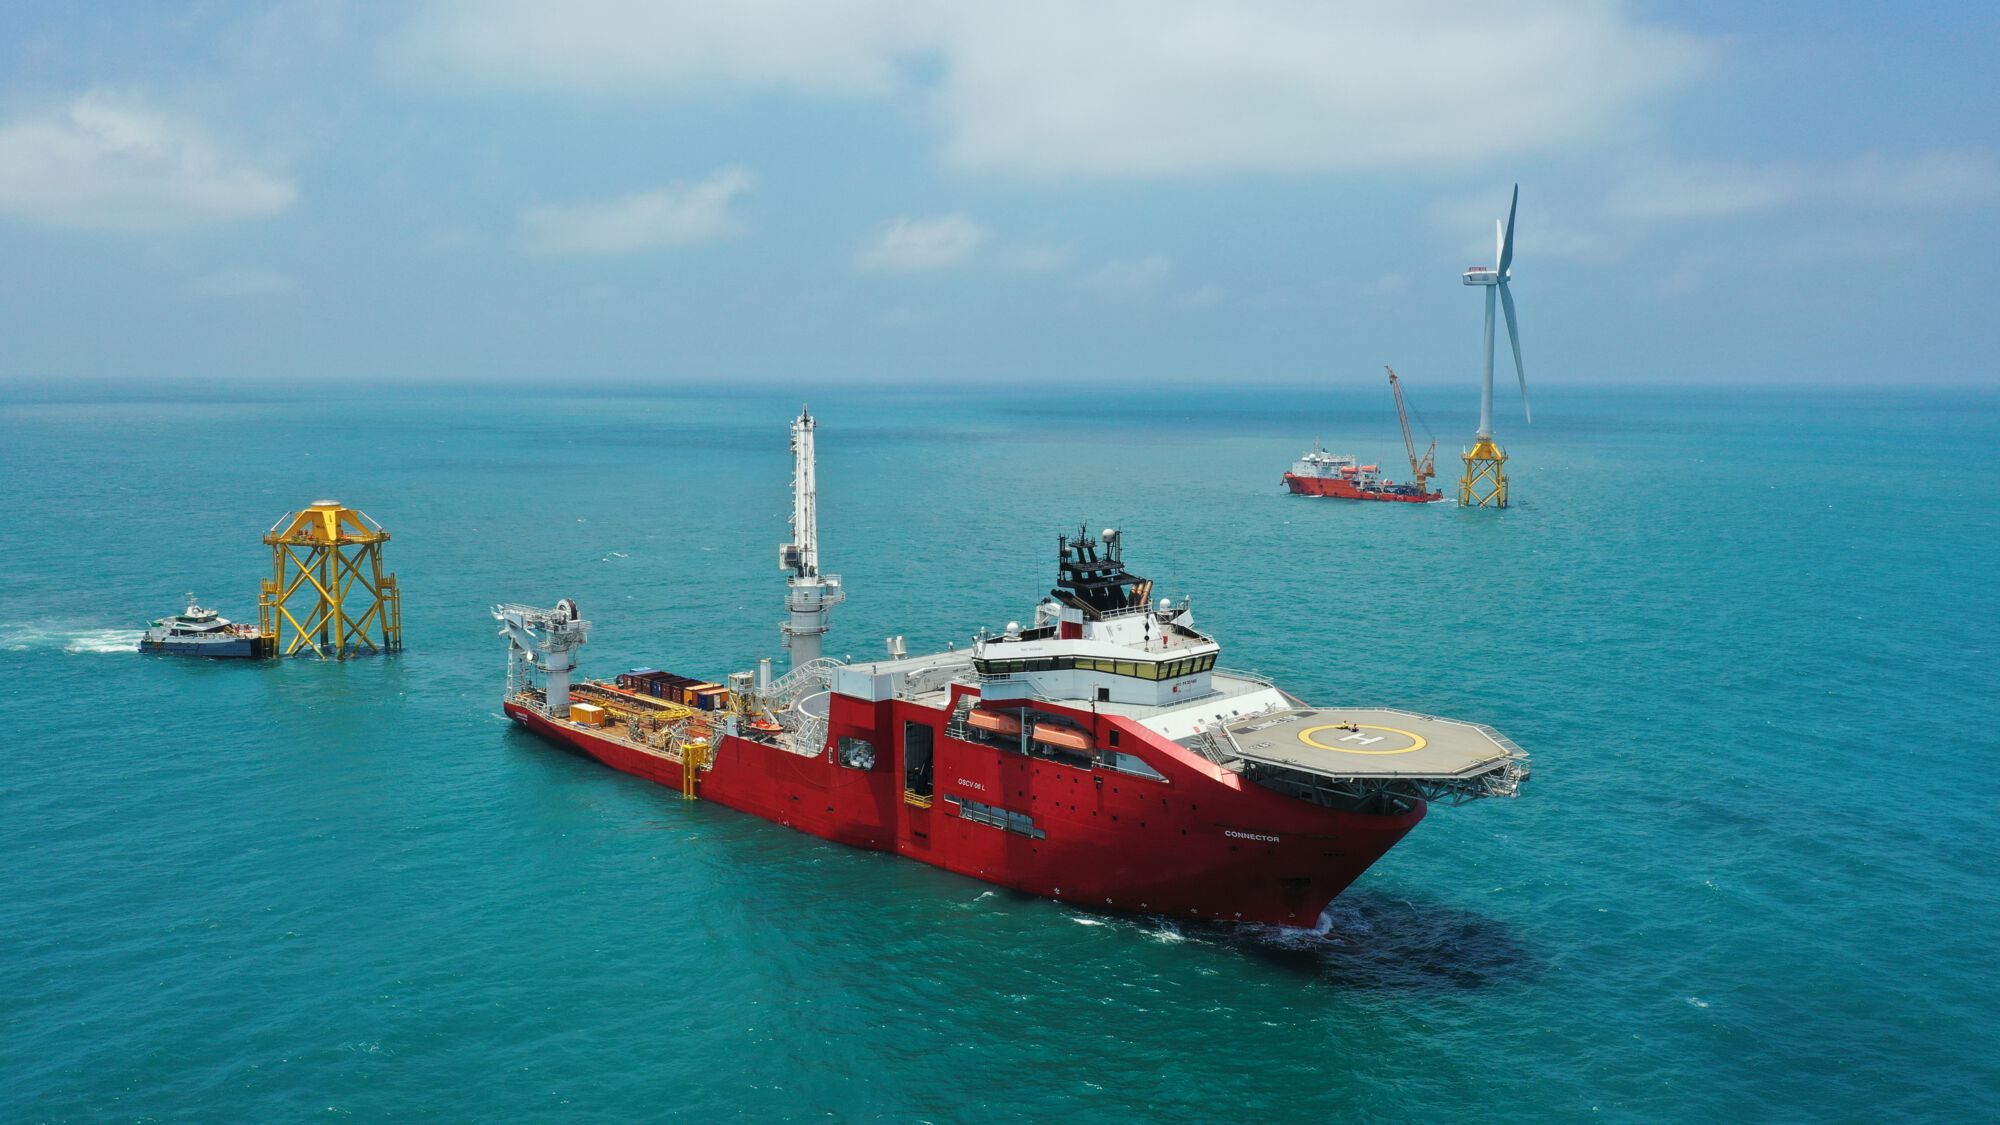 Jan De Nul enters partnership to transport green electrons from Africa to Europe via subsea cable